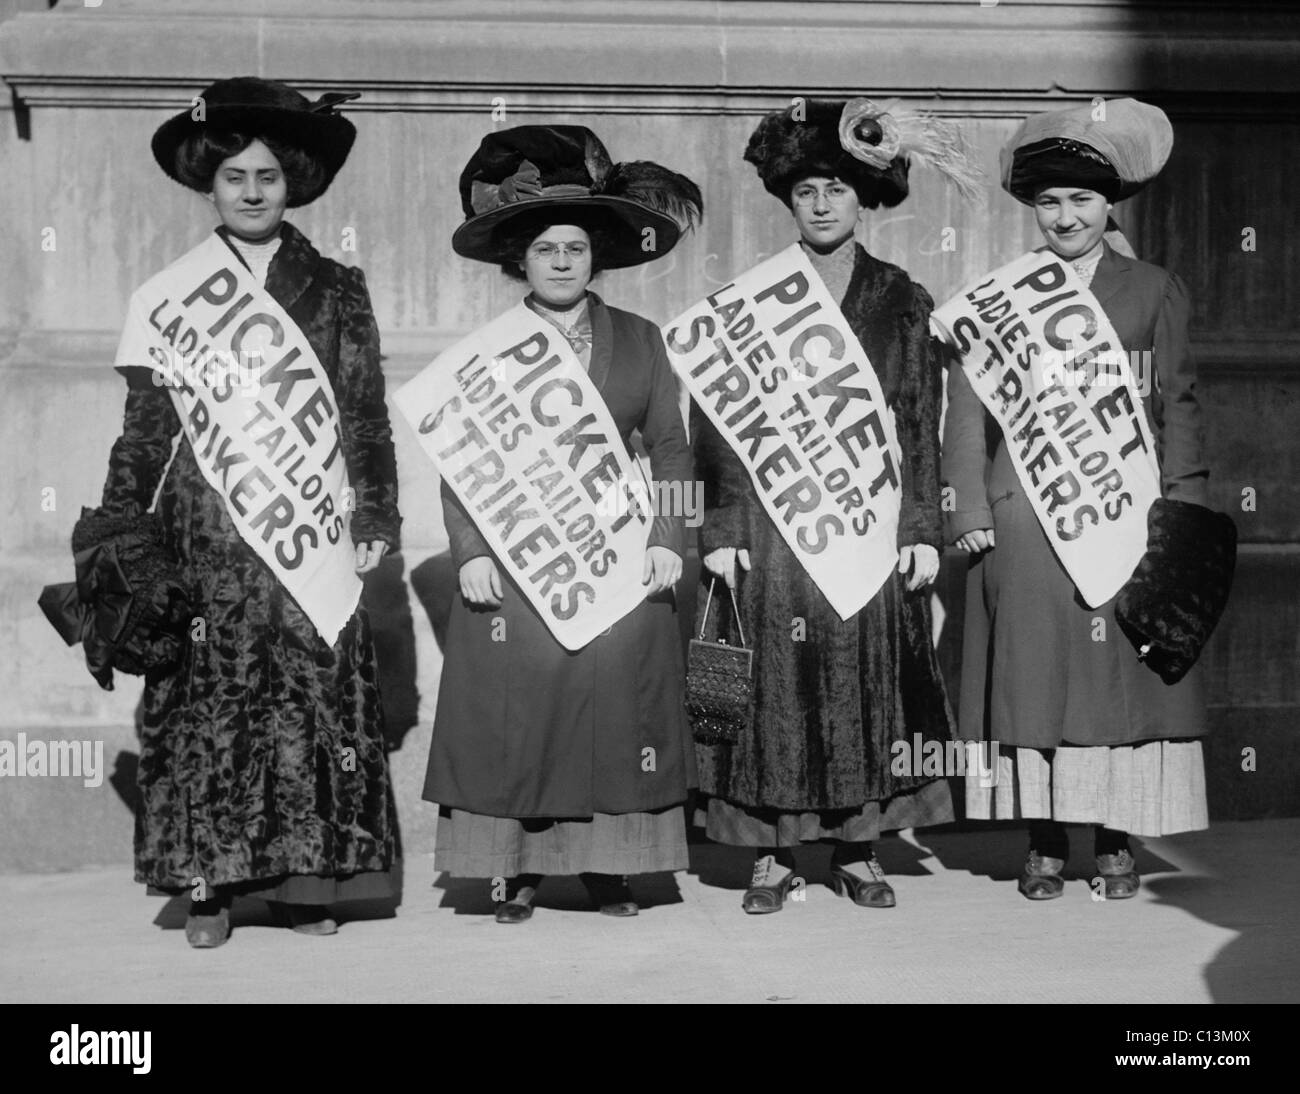 Strike pickets from Ladies Tailors, during the New York shirtwaist strike of 1909 which began after a labor dispute at the Triangle Shirtwaist factory, the site of the tragic 1911 fire. Stock Photo